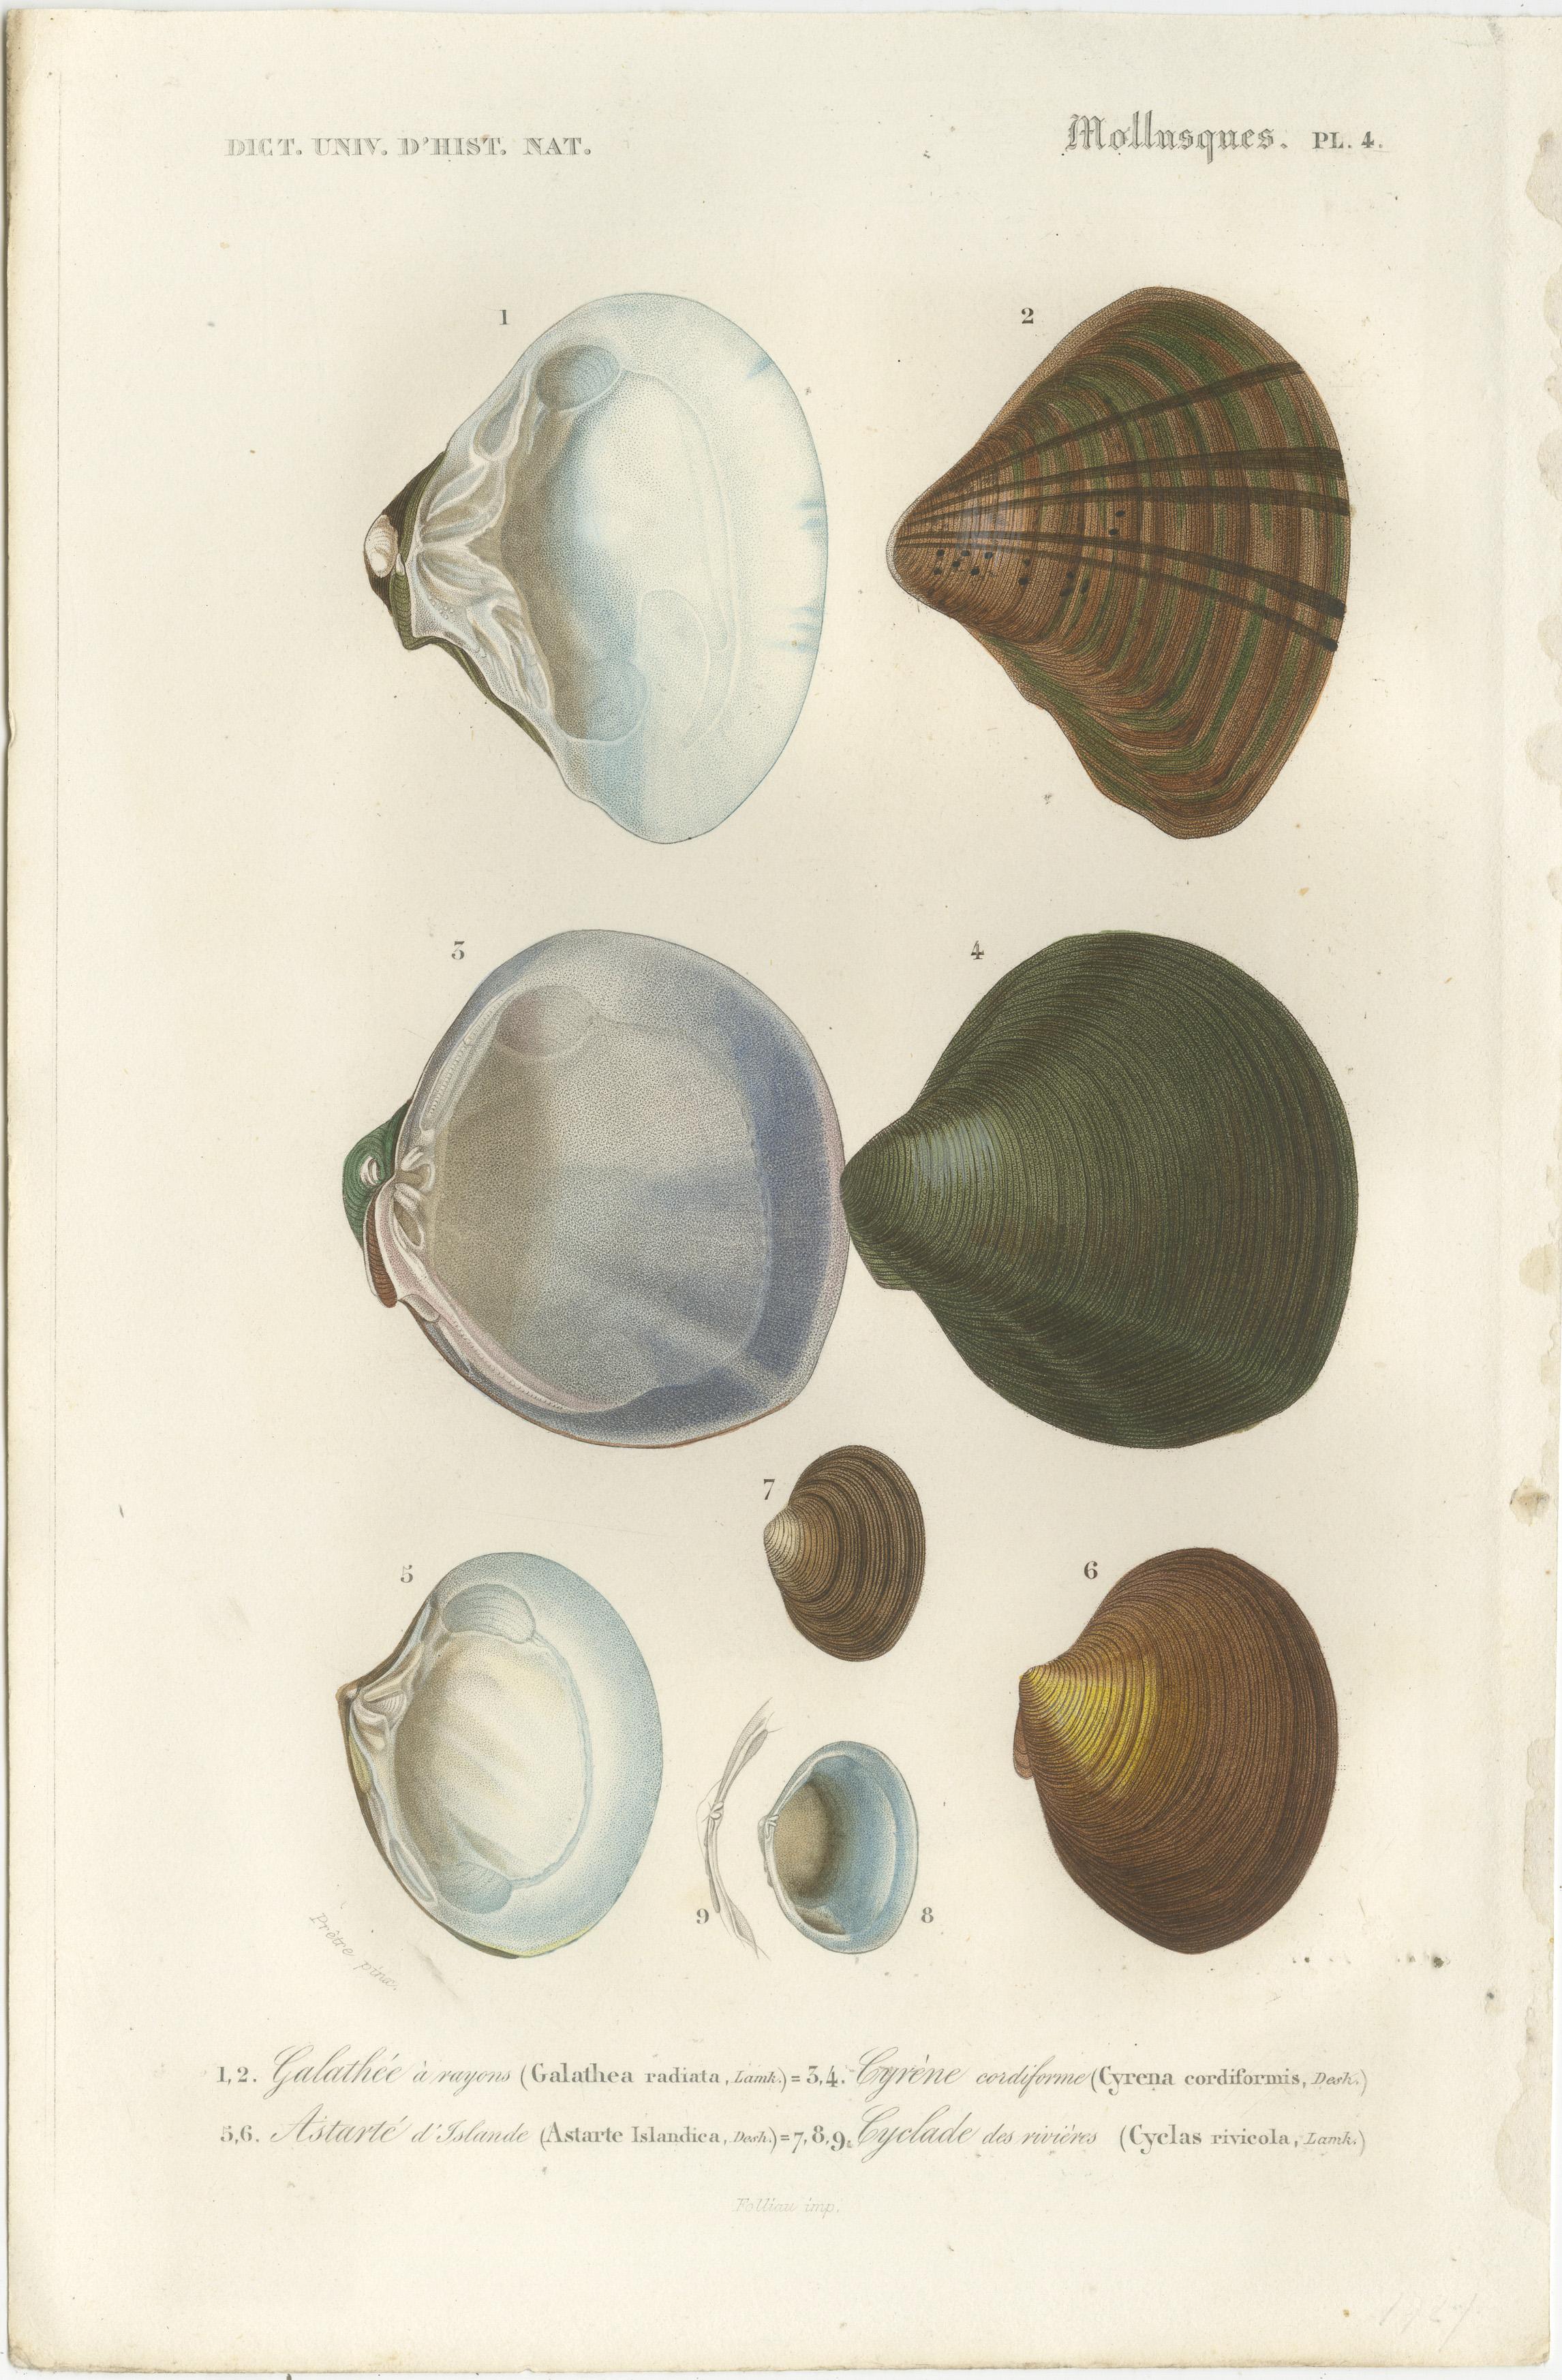 The collage features a curated selection of marine gastropods and bivalves from the 